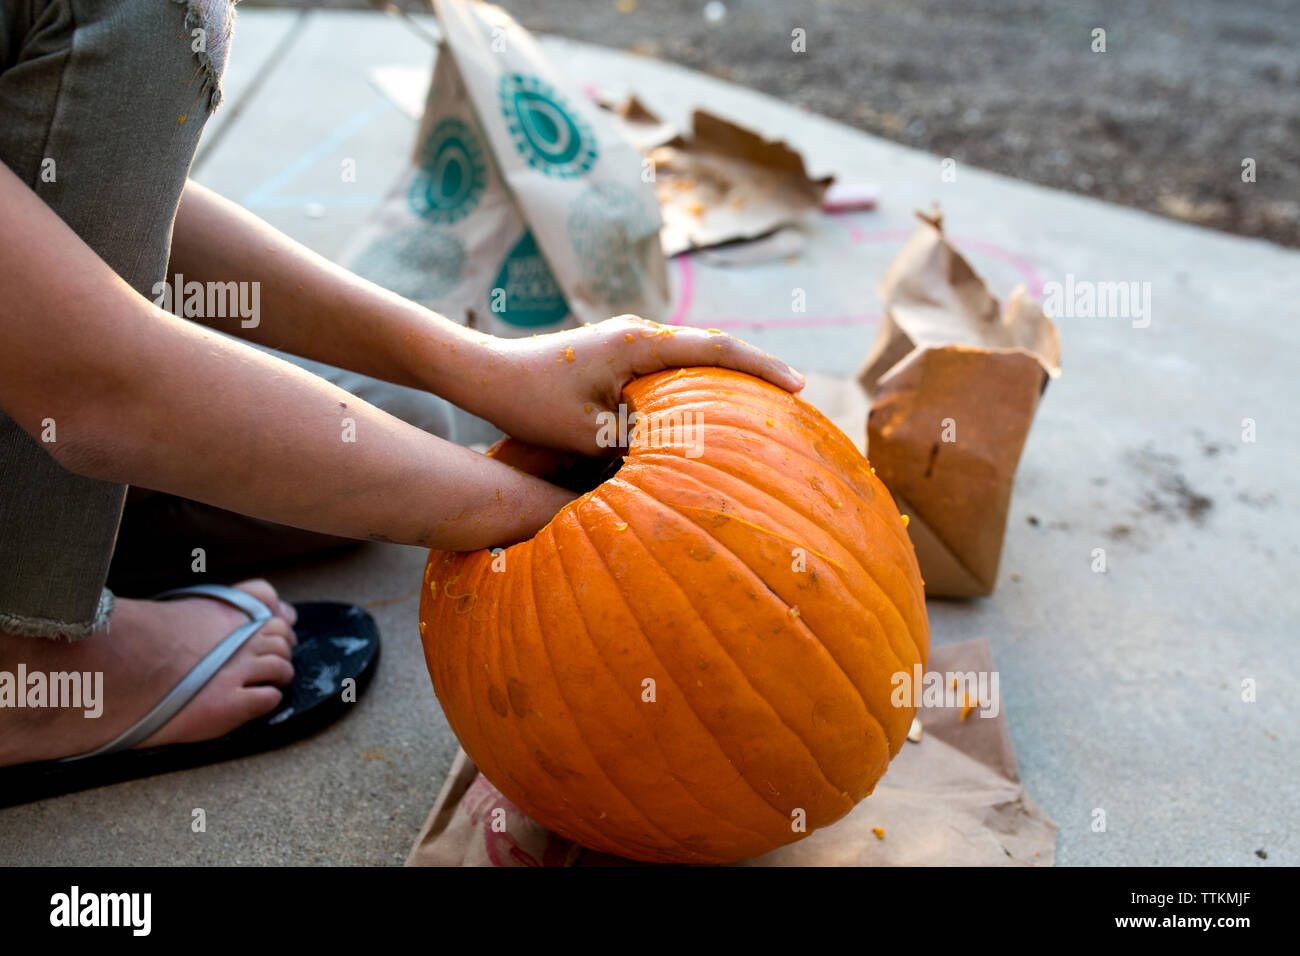 Girl reaches into pumpkin during the carving process Stock Photo